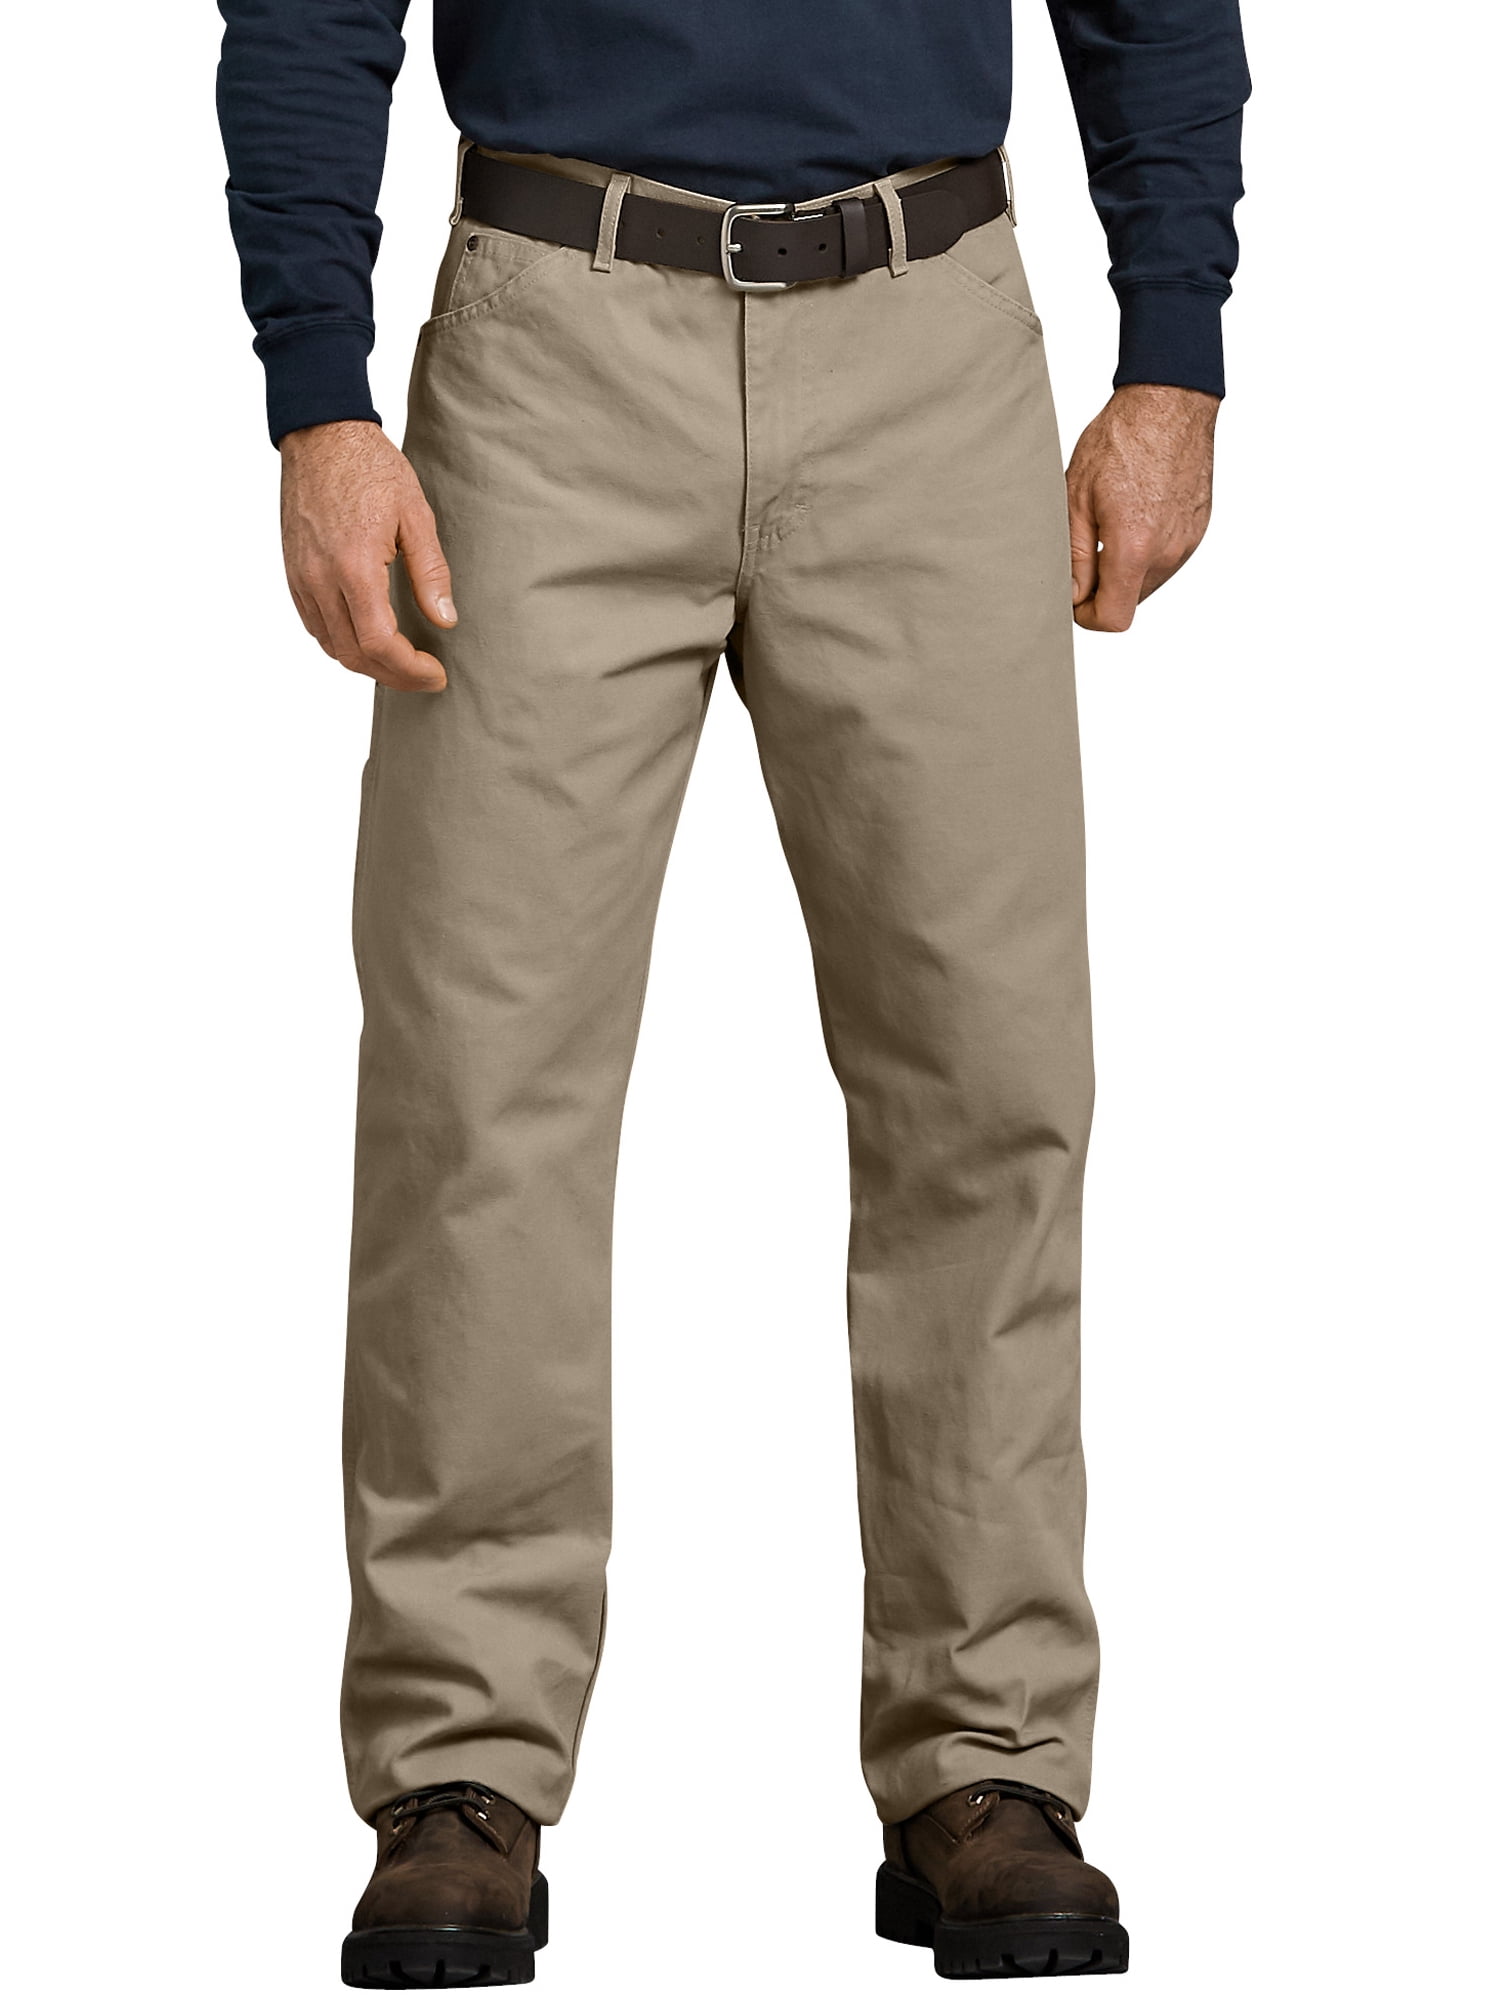 dickies men's relaxed fit carpenter jeans